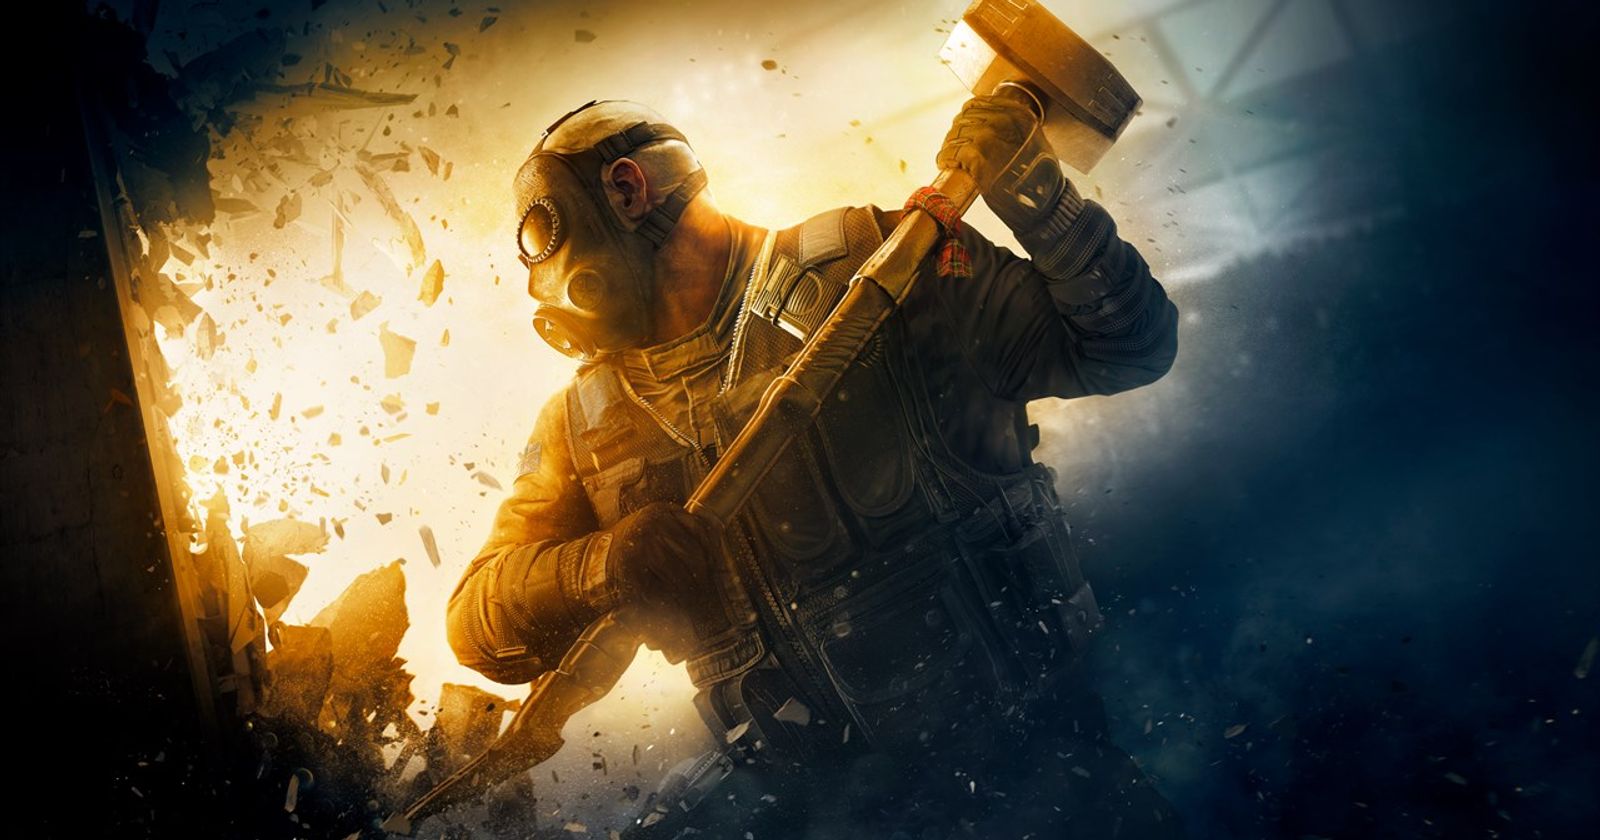 What happened to the Rainbow Six Siege Mobile ripoff? — SiegeGG